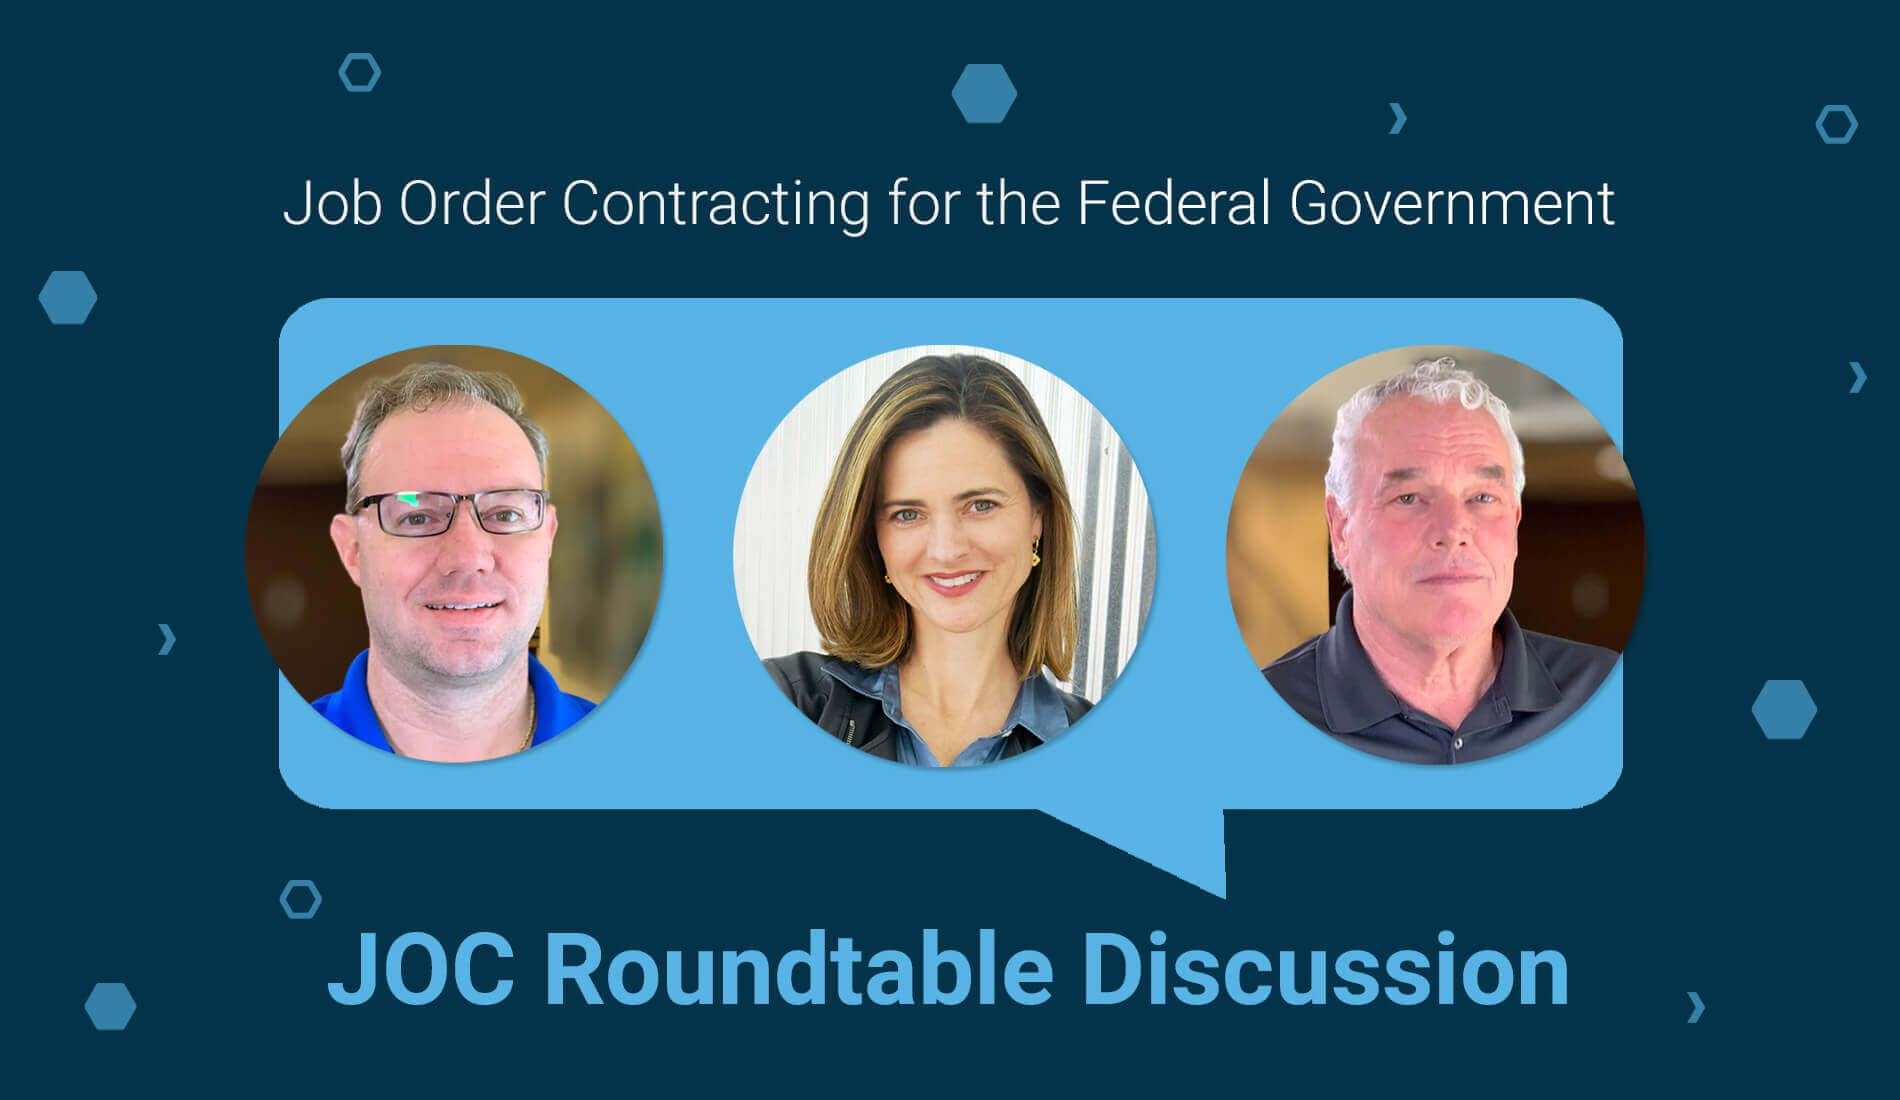 Job Order Contracting for the Federal Government Virtual Training: Roundtable Discussion 2